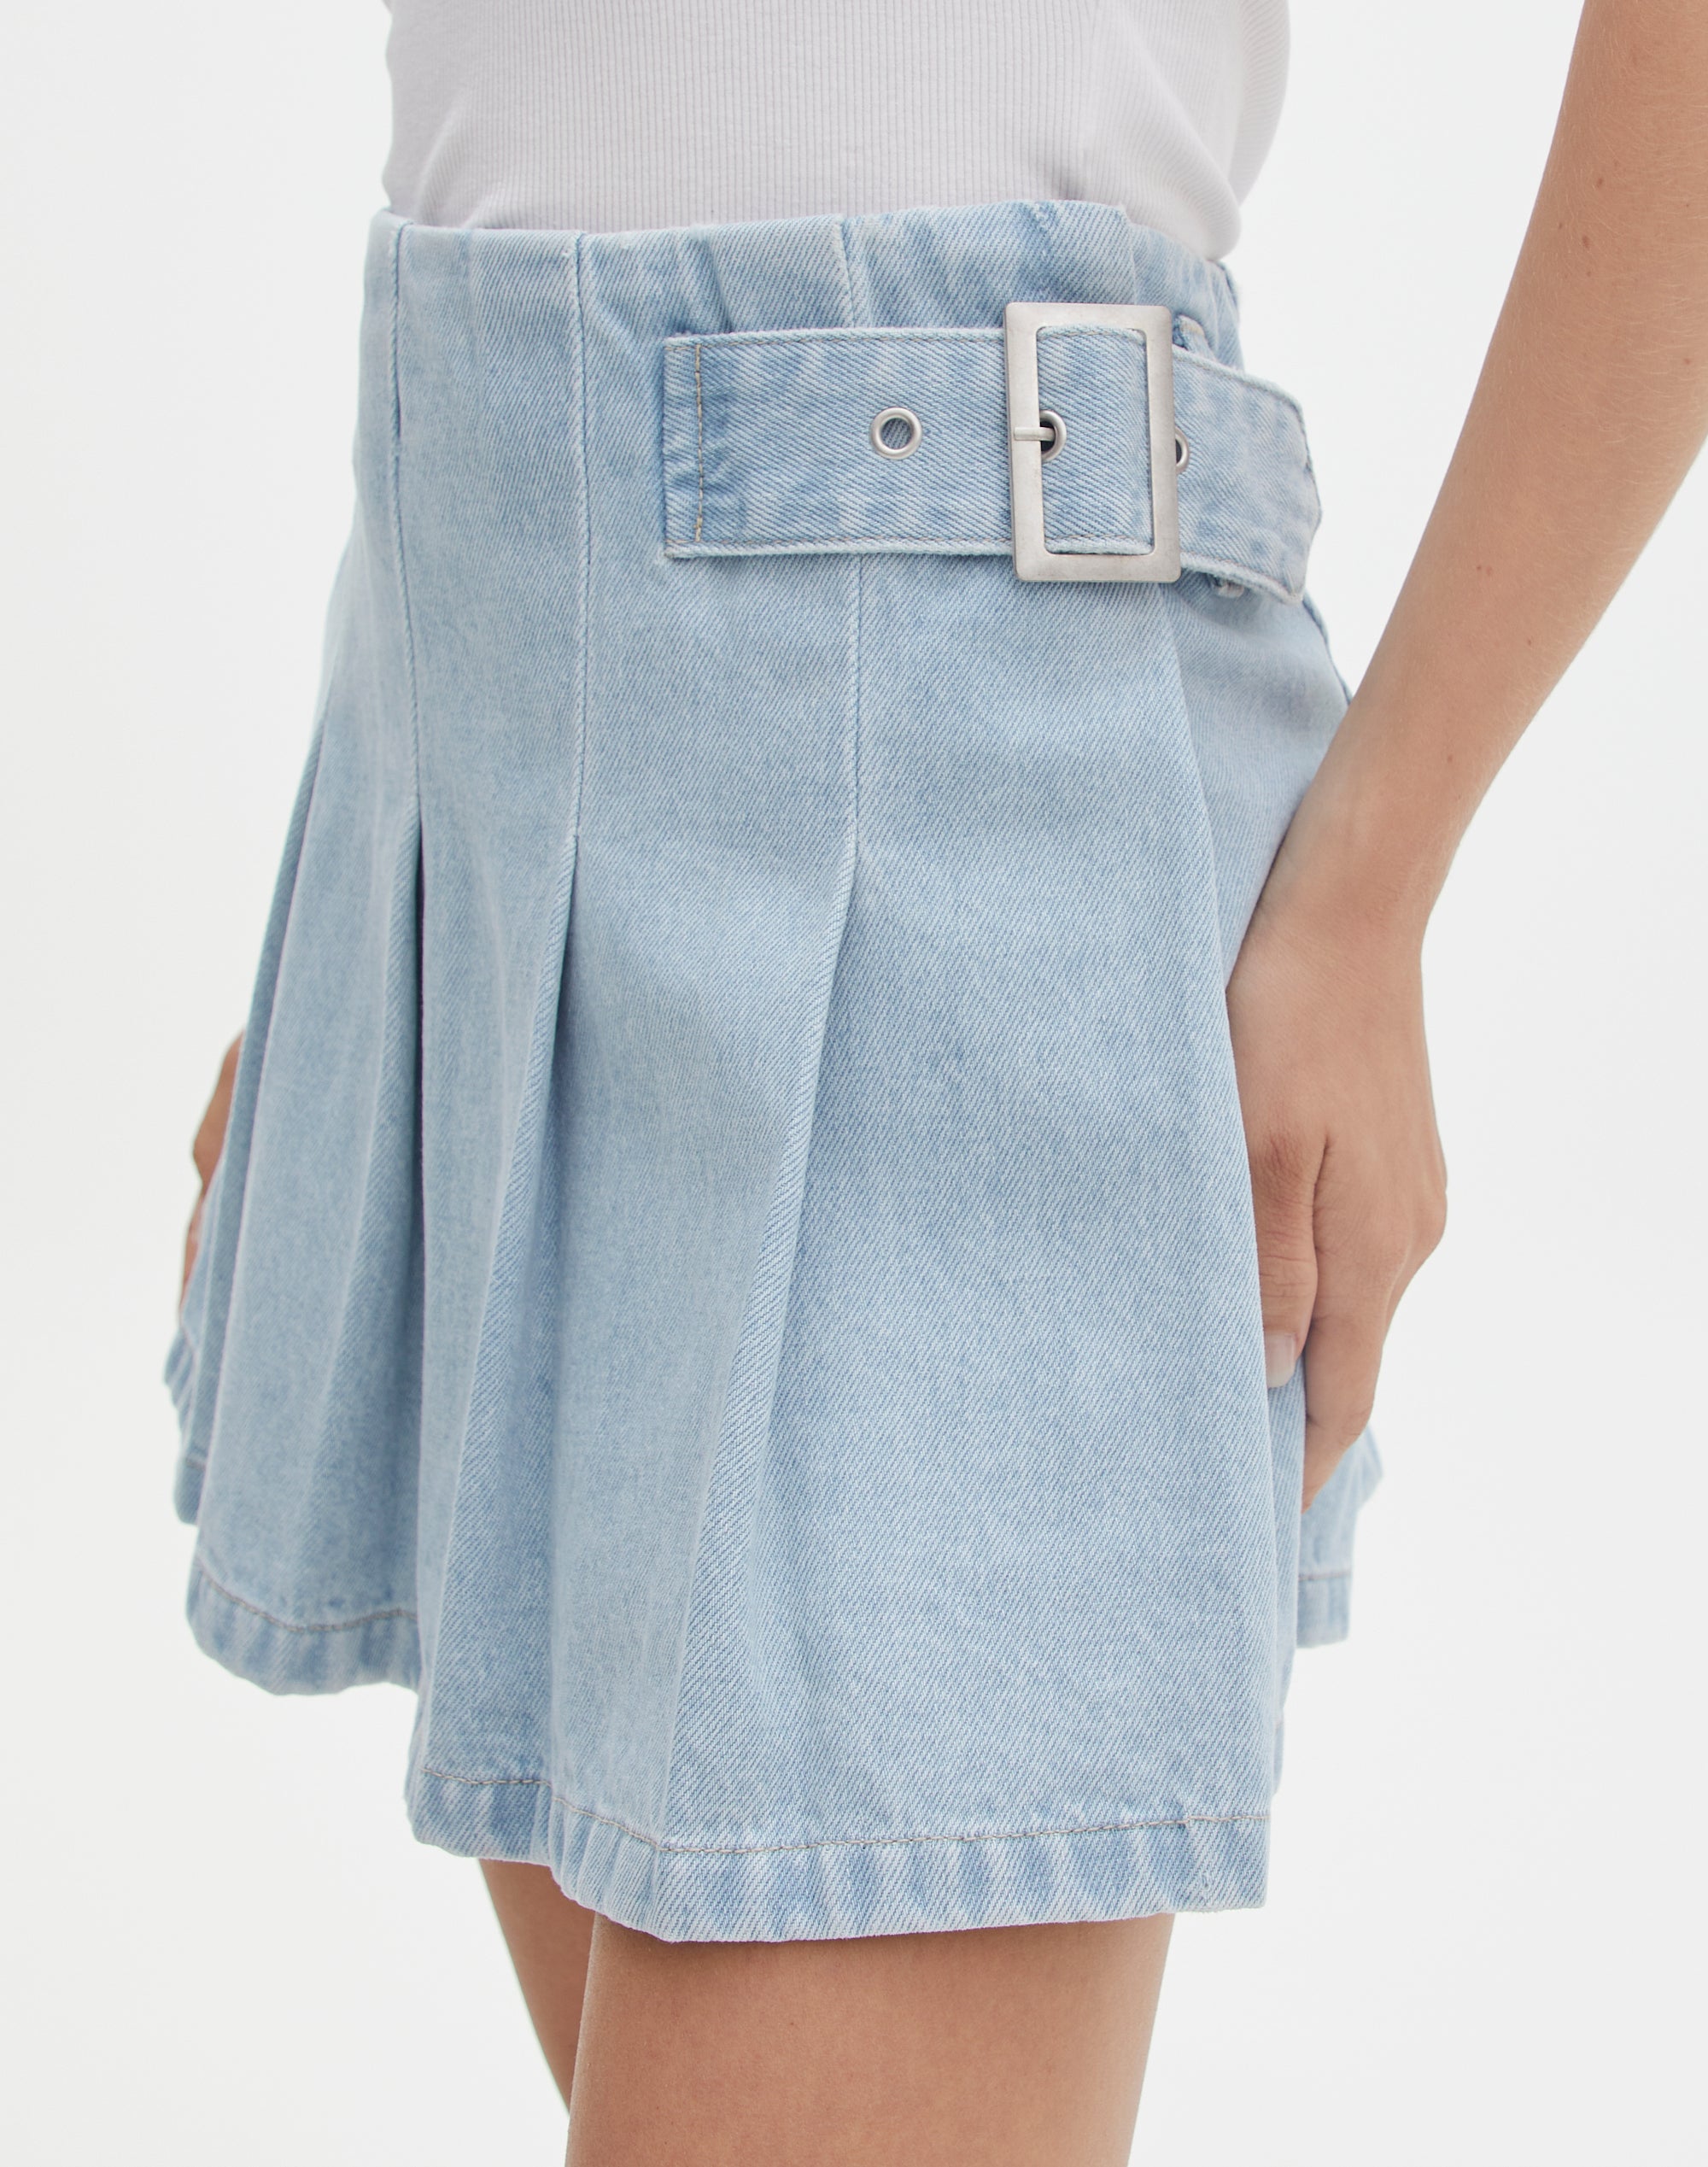 Plus Size Denim Skirt With Ruffles, High Waist Bottom, And Pleated Micro  Mini Skater For Women Casual And Stylish Jurken Denim Pleated Mini Skirt  From Baonuan, $17.84 | DHgate.Com